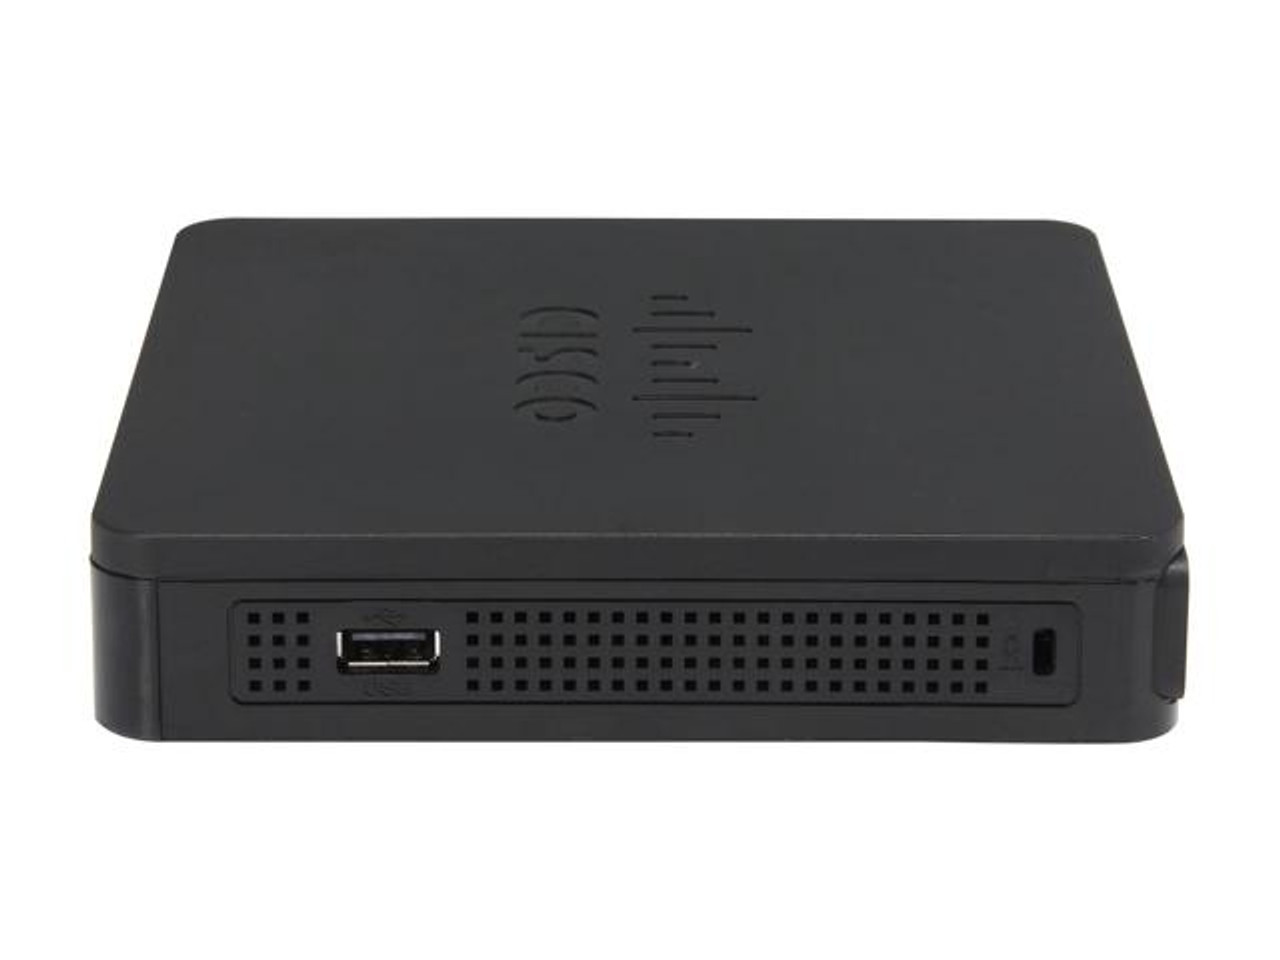 Cisco Rv130 Vpn Router With 3g/ 4g Failover And 4 Port Switch Rv130-k9-au